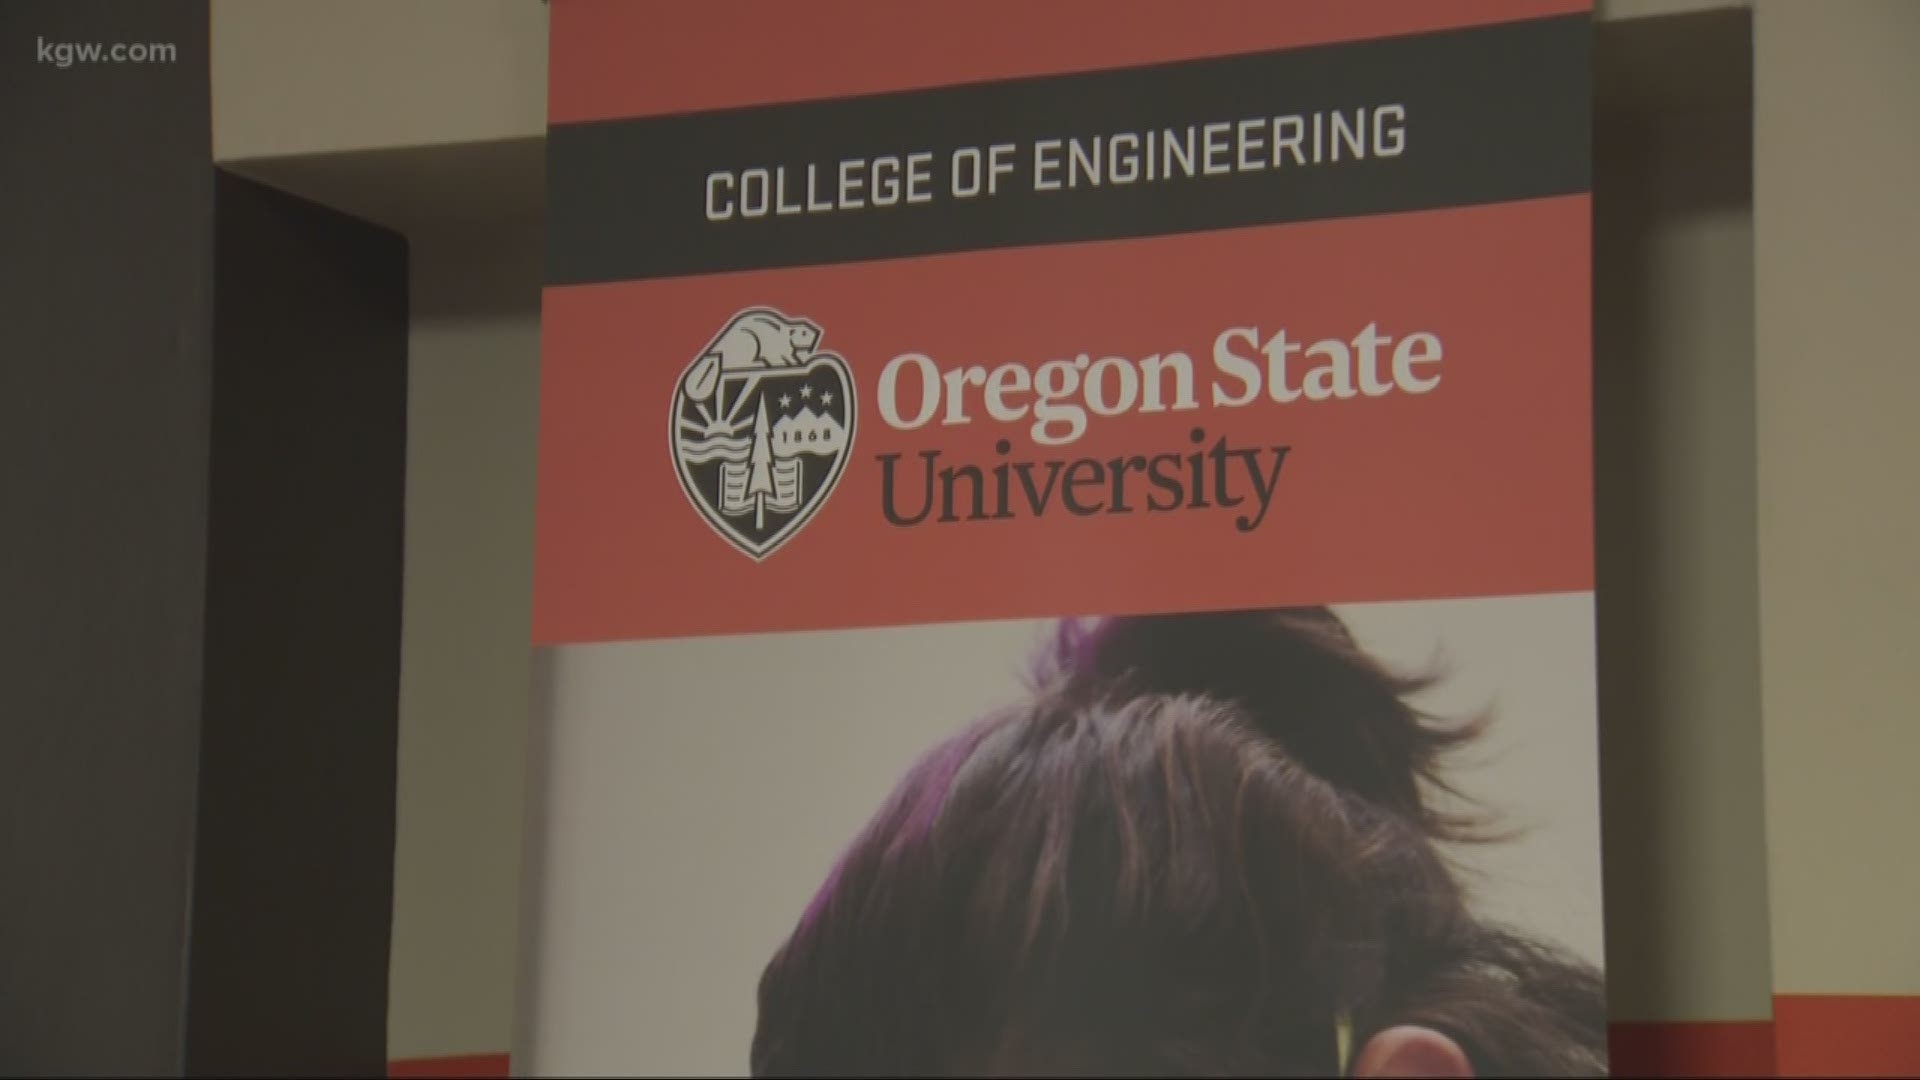 It's one of more than 200 products that were showcased at Oregon State University's Engineering Expo.